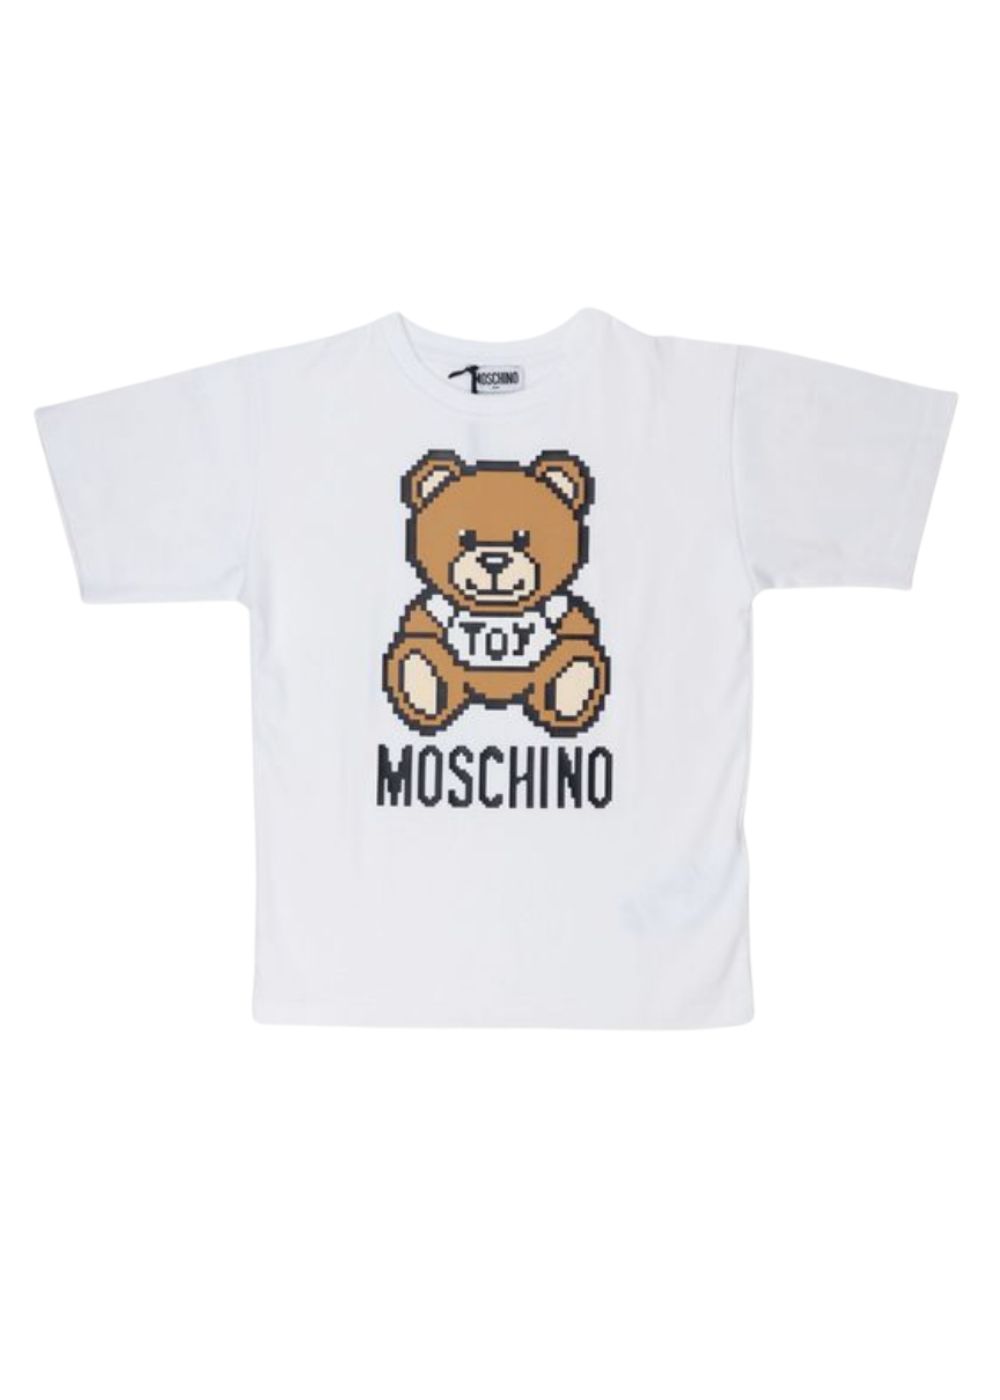 Featured image for “Moschino Maxi T-shirt”